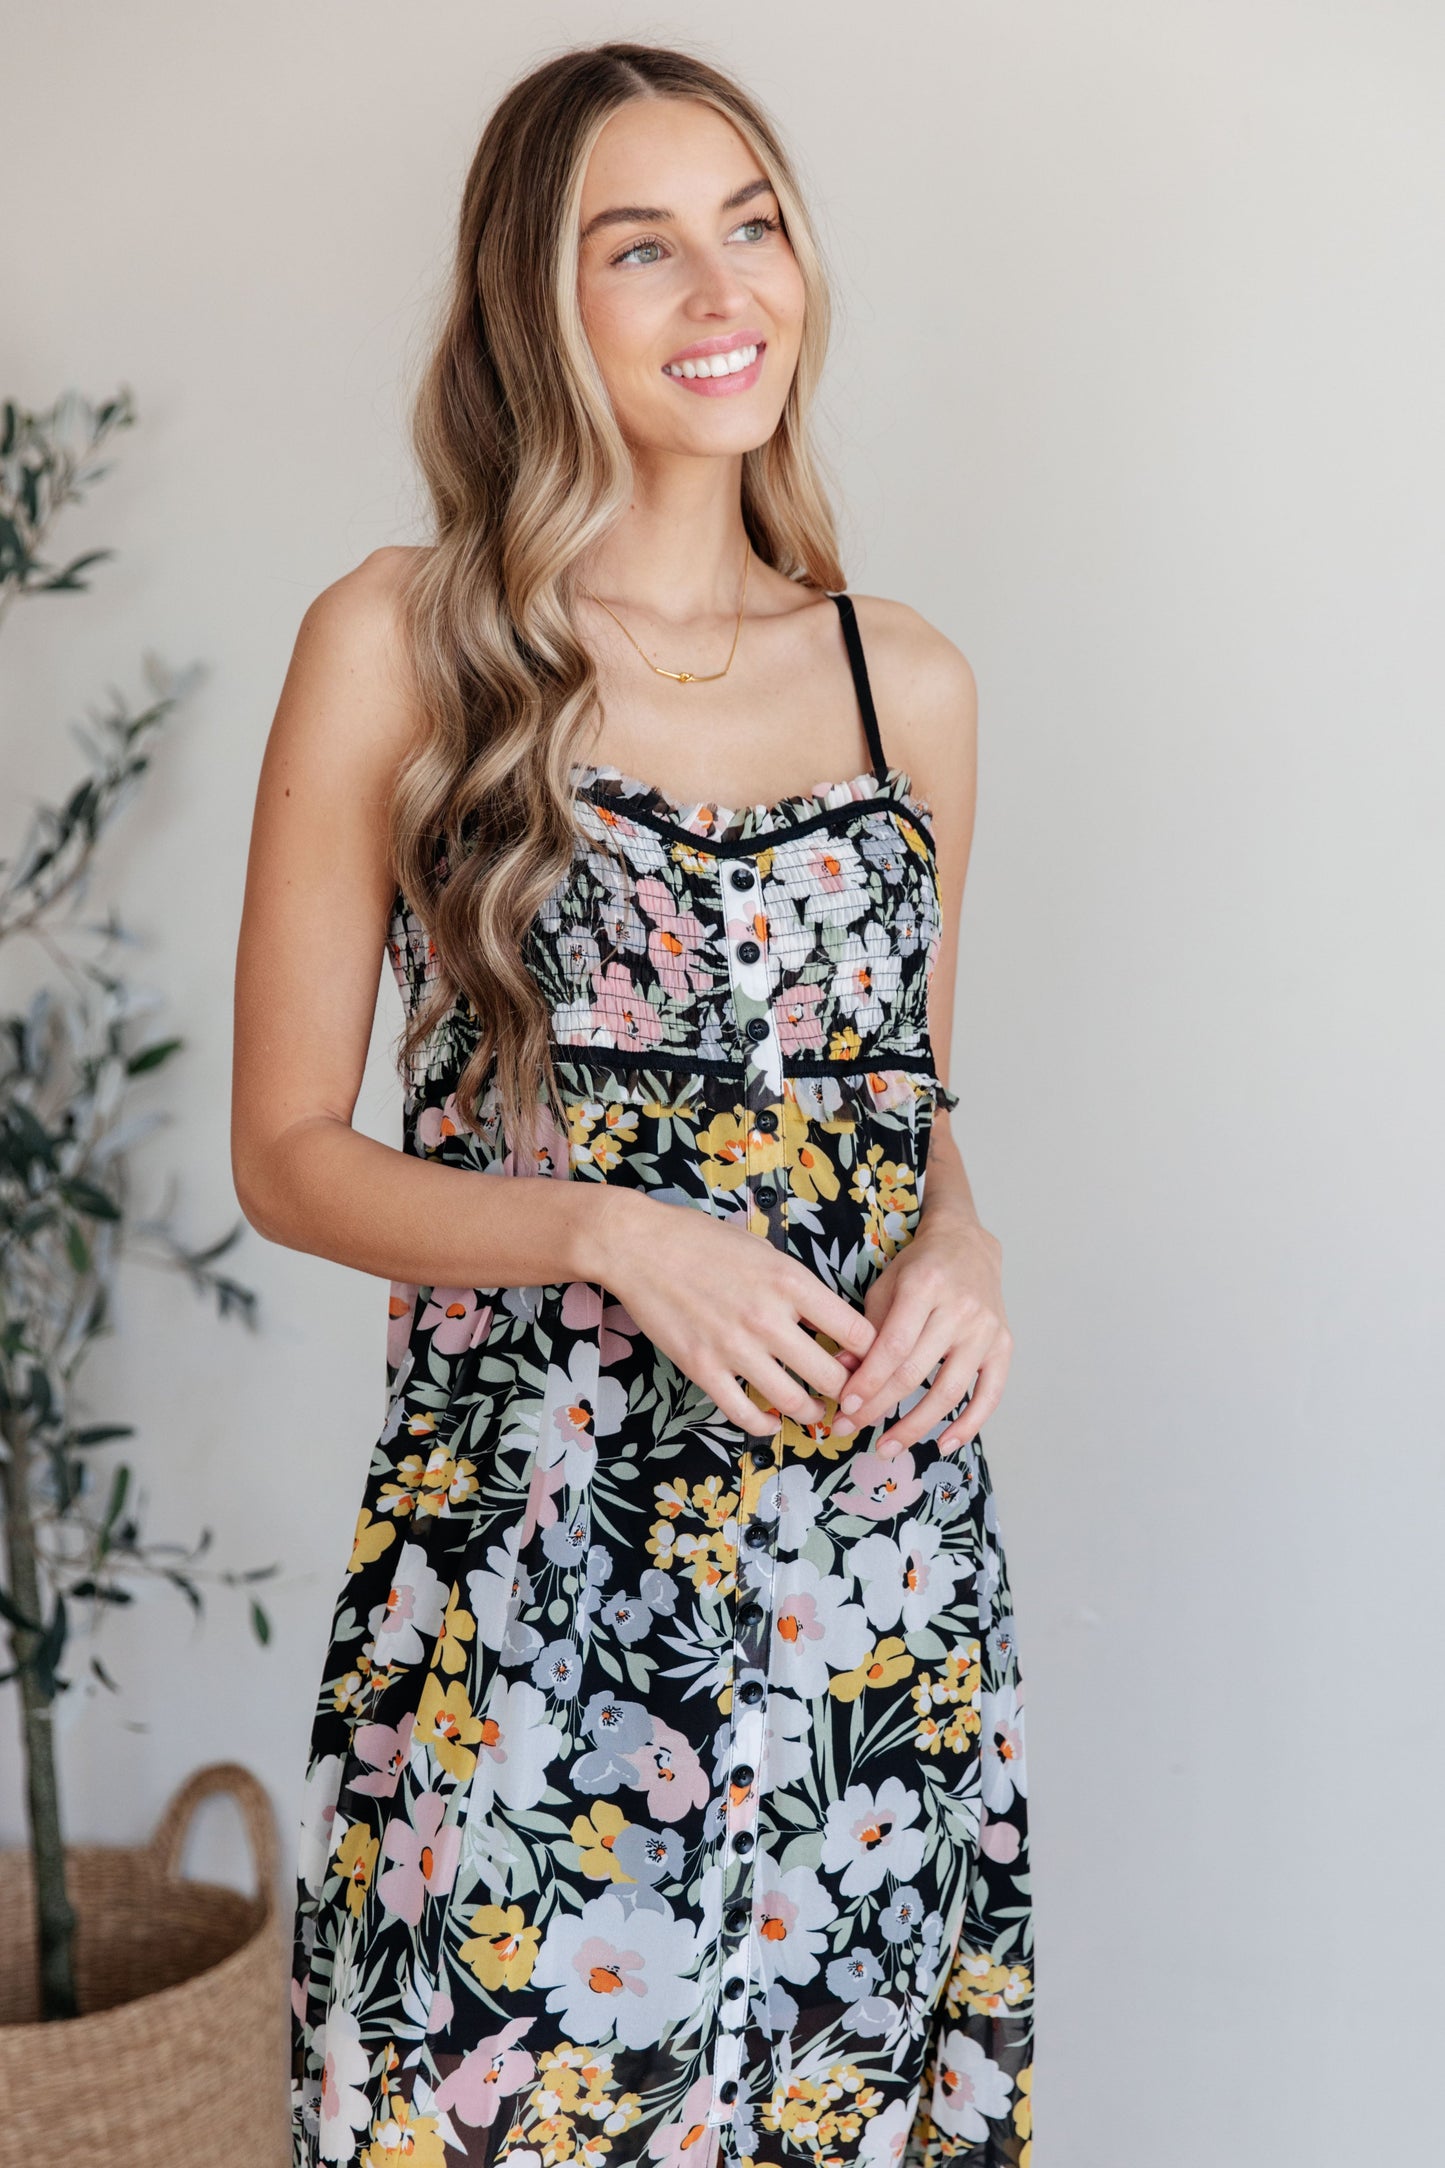 Blooming Beauty Floral Maxi Dress   